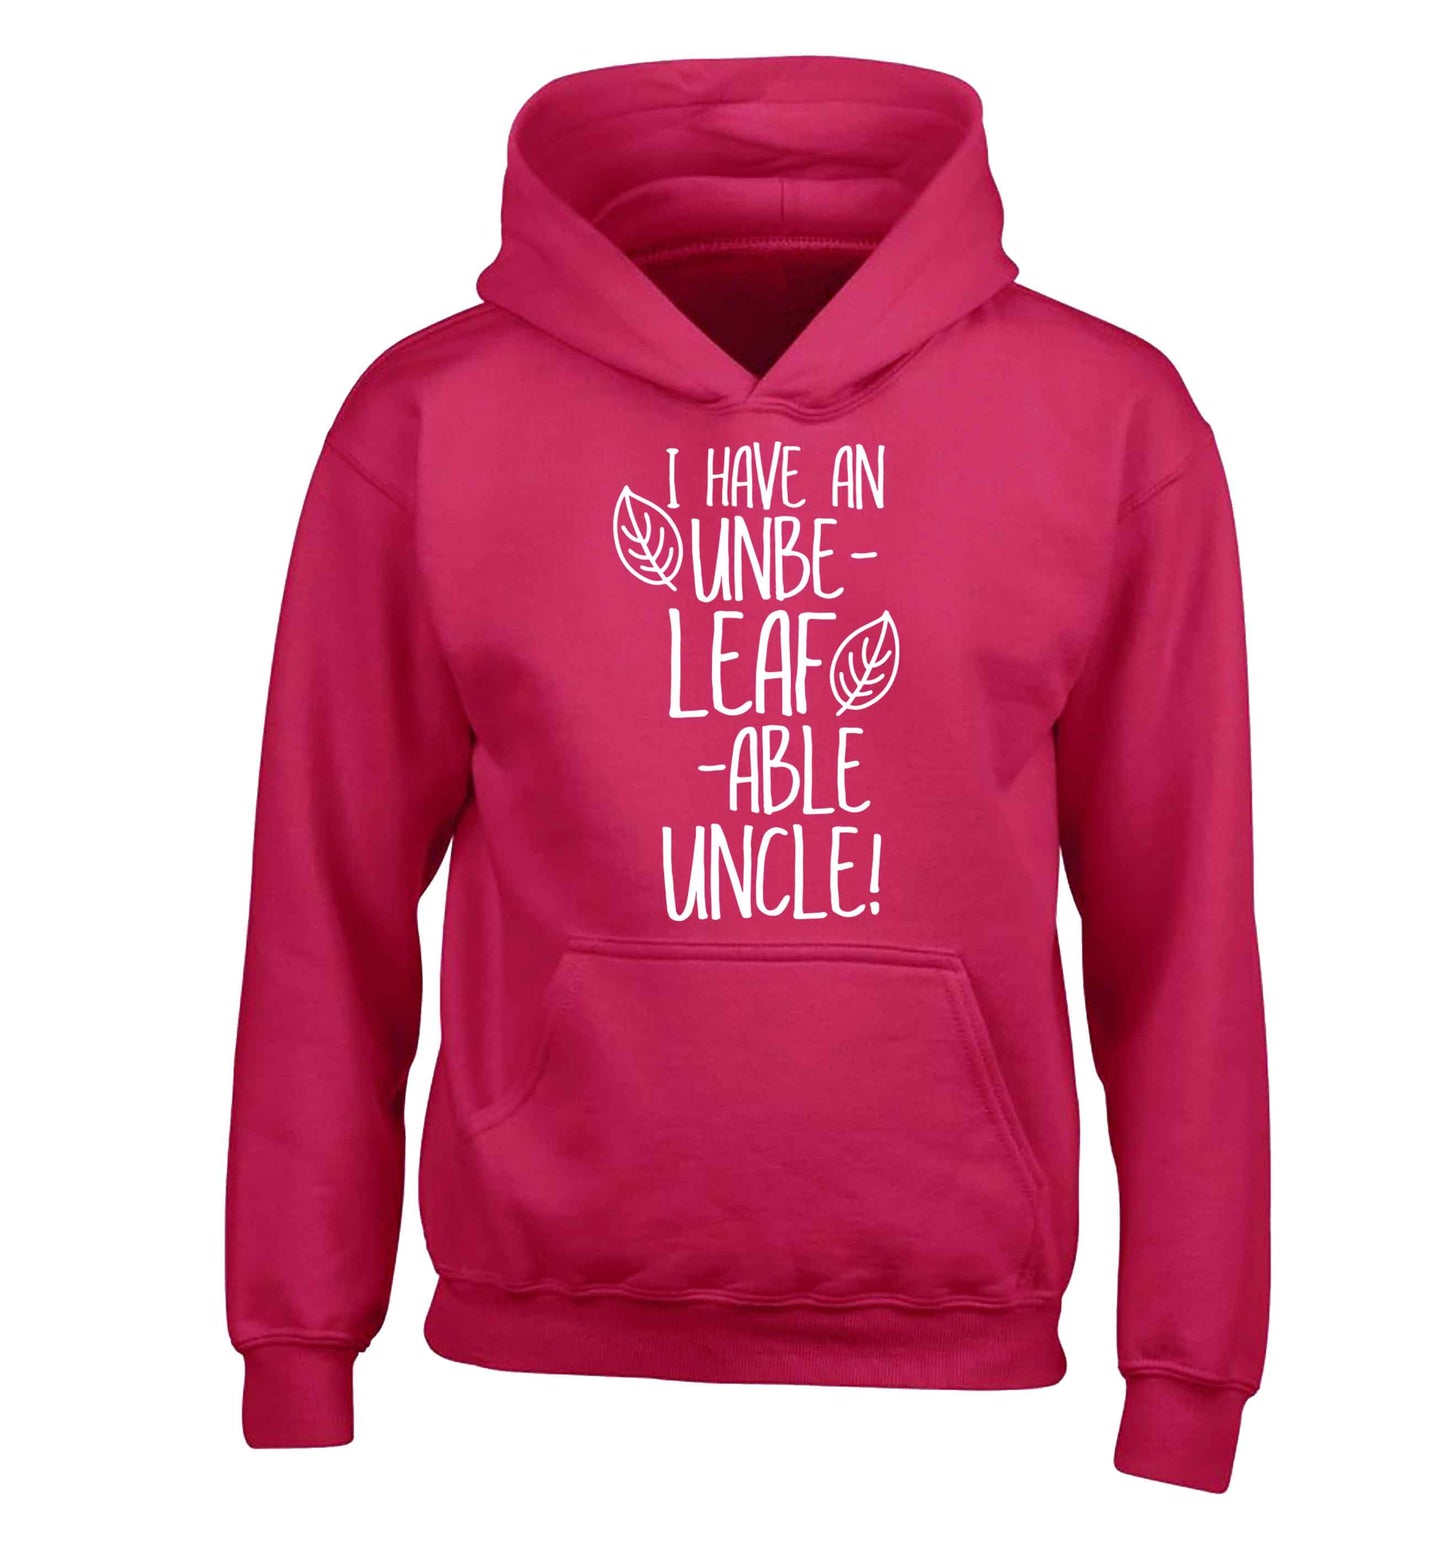 I have an unbe-leaf-able uncle children's pink hoodie 12-13 Years